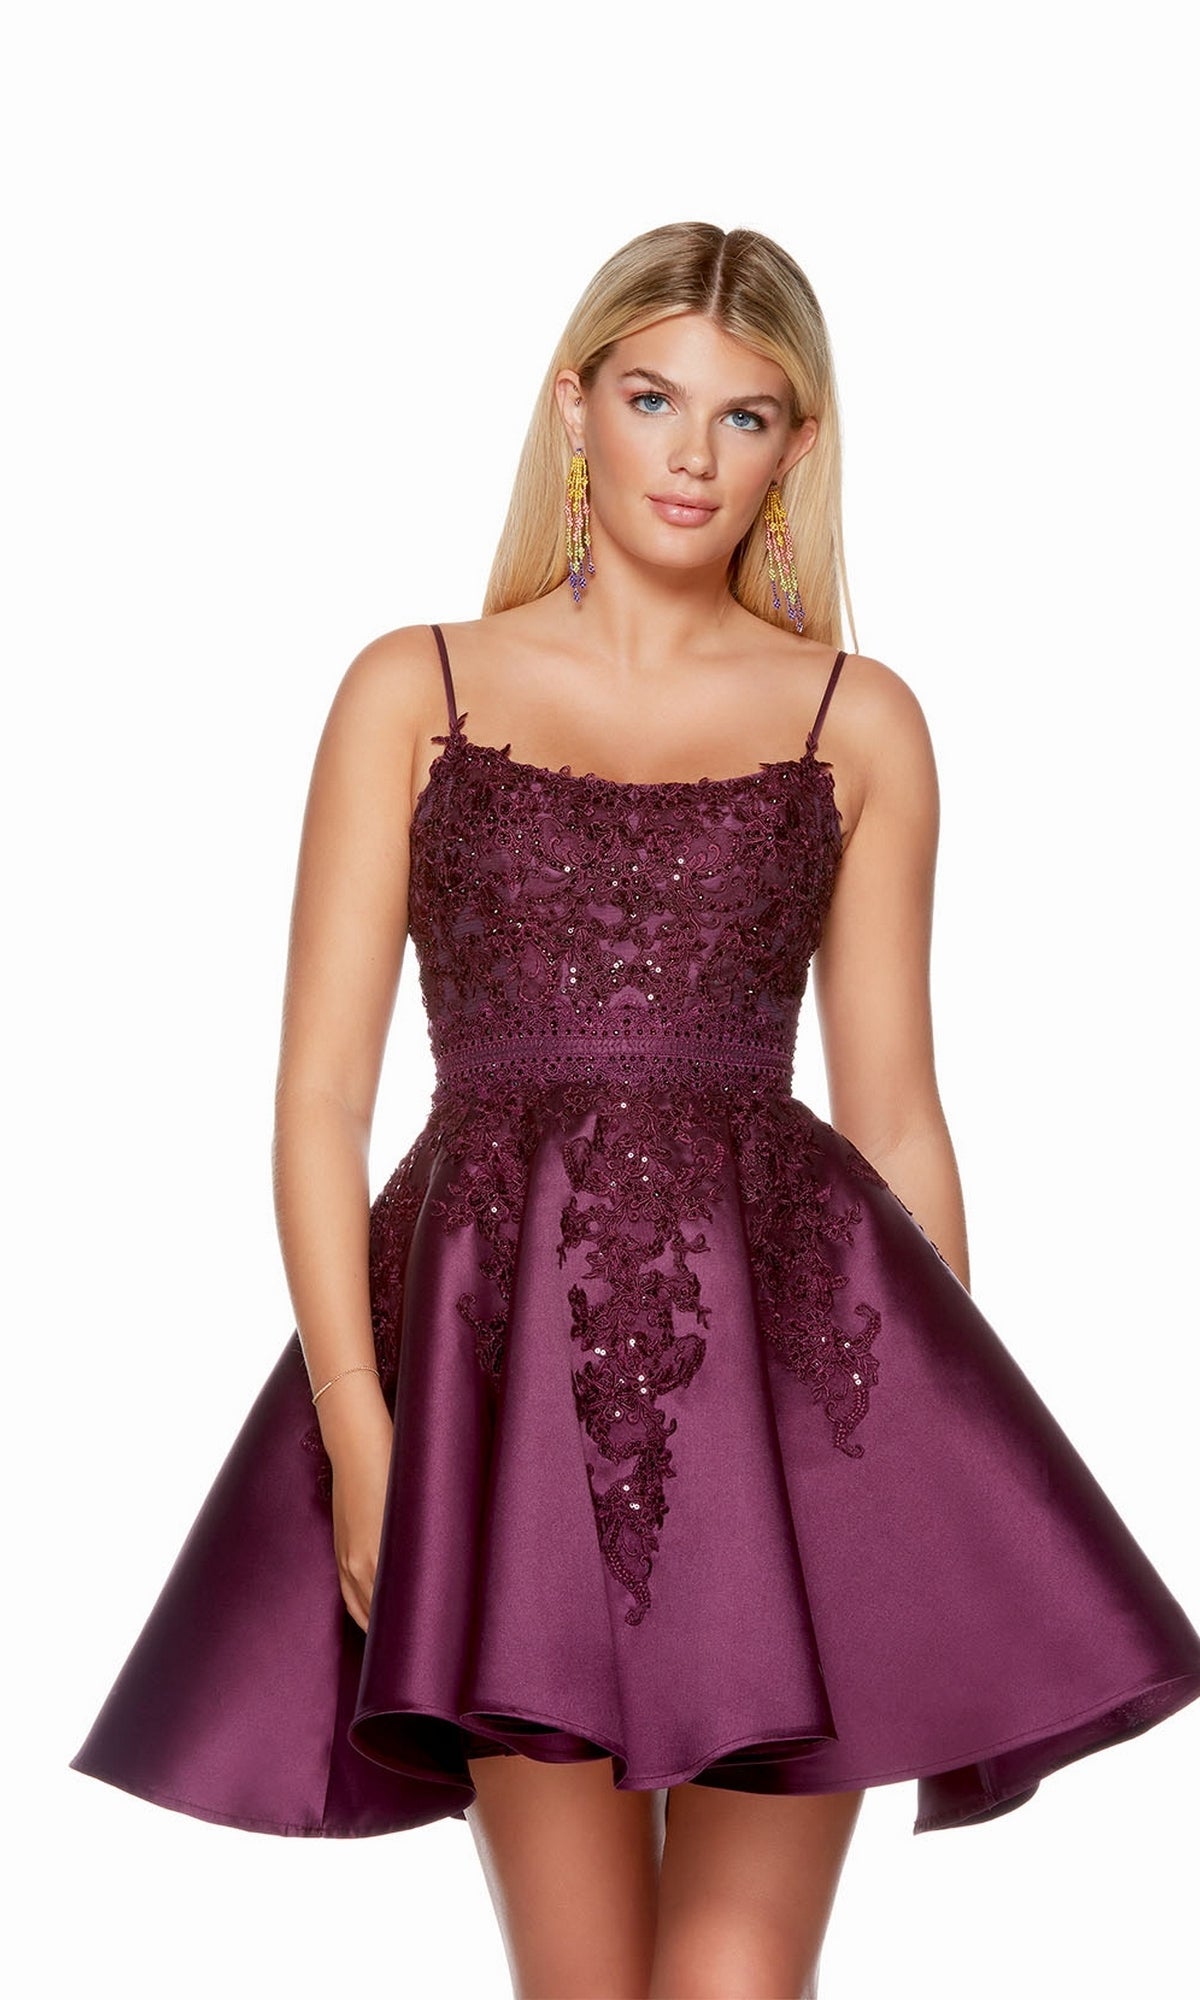 Black Plum Short Dress By Alyce For Homecoming 3164